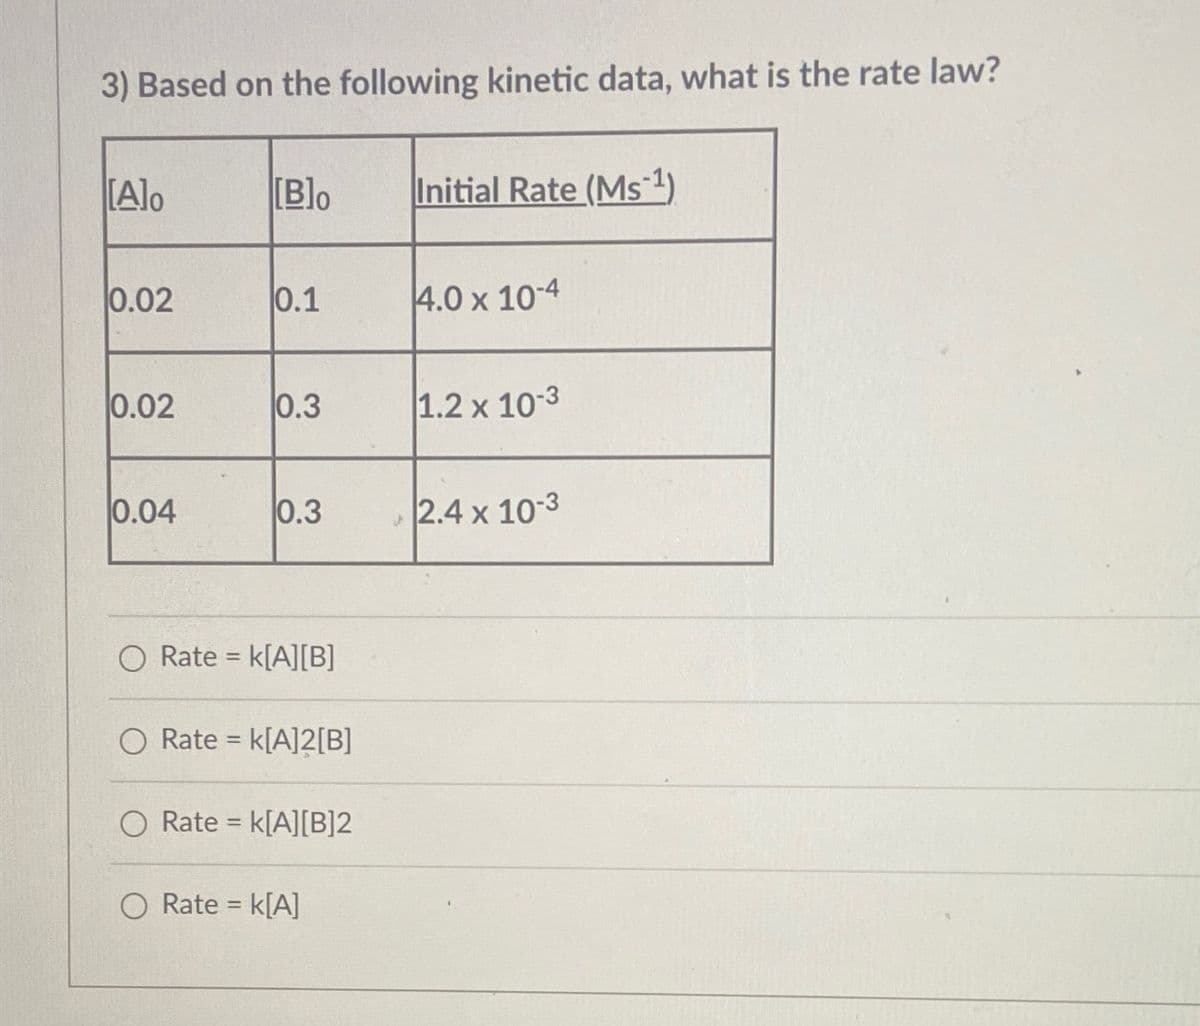 3) Based on the following kinetic data, what is the rate law?
[Alo
[B]o
Initial Rate (Ms¹)
0.02
0.1
4.0 x 10-4
0.02
0.3
1.2 x 10-3
0.04
0.3
2.4 x 10-3
O Rate = k[A][B]
Rate = k[A]2[B]
O Rate = k[A][B]2
O Rate = k[A]